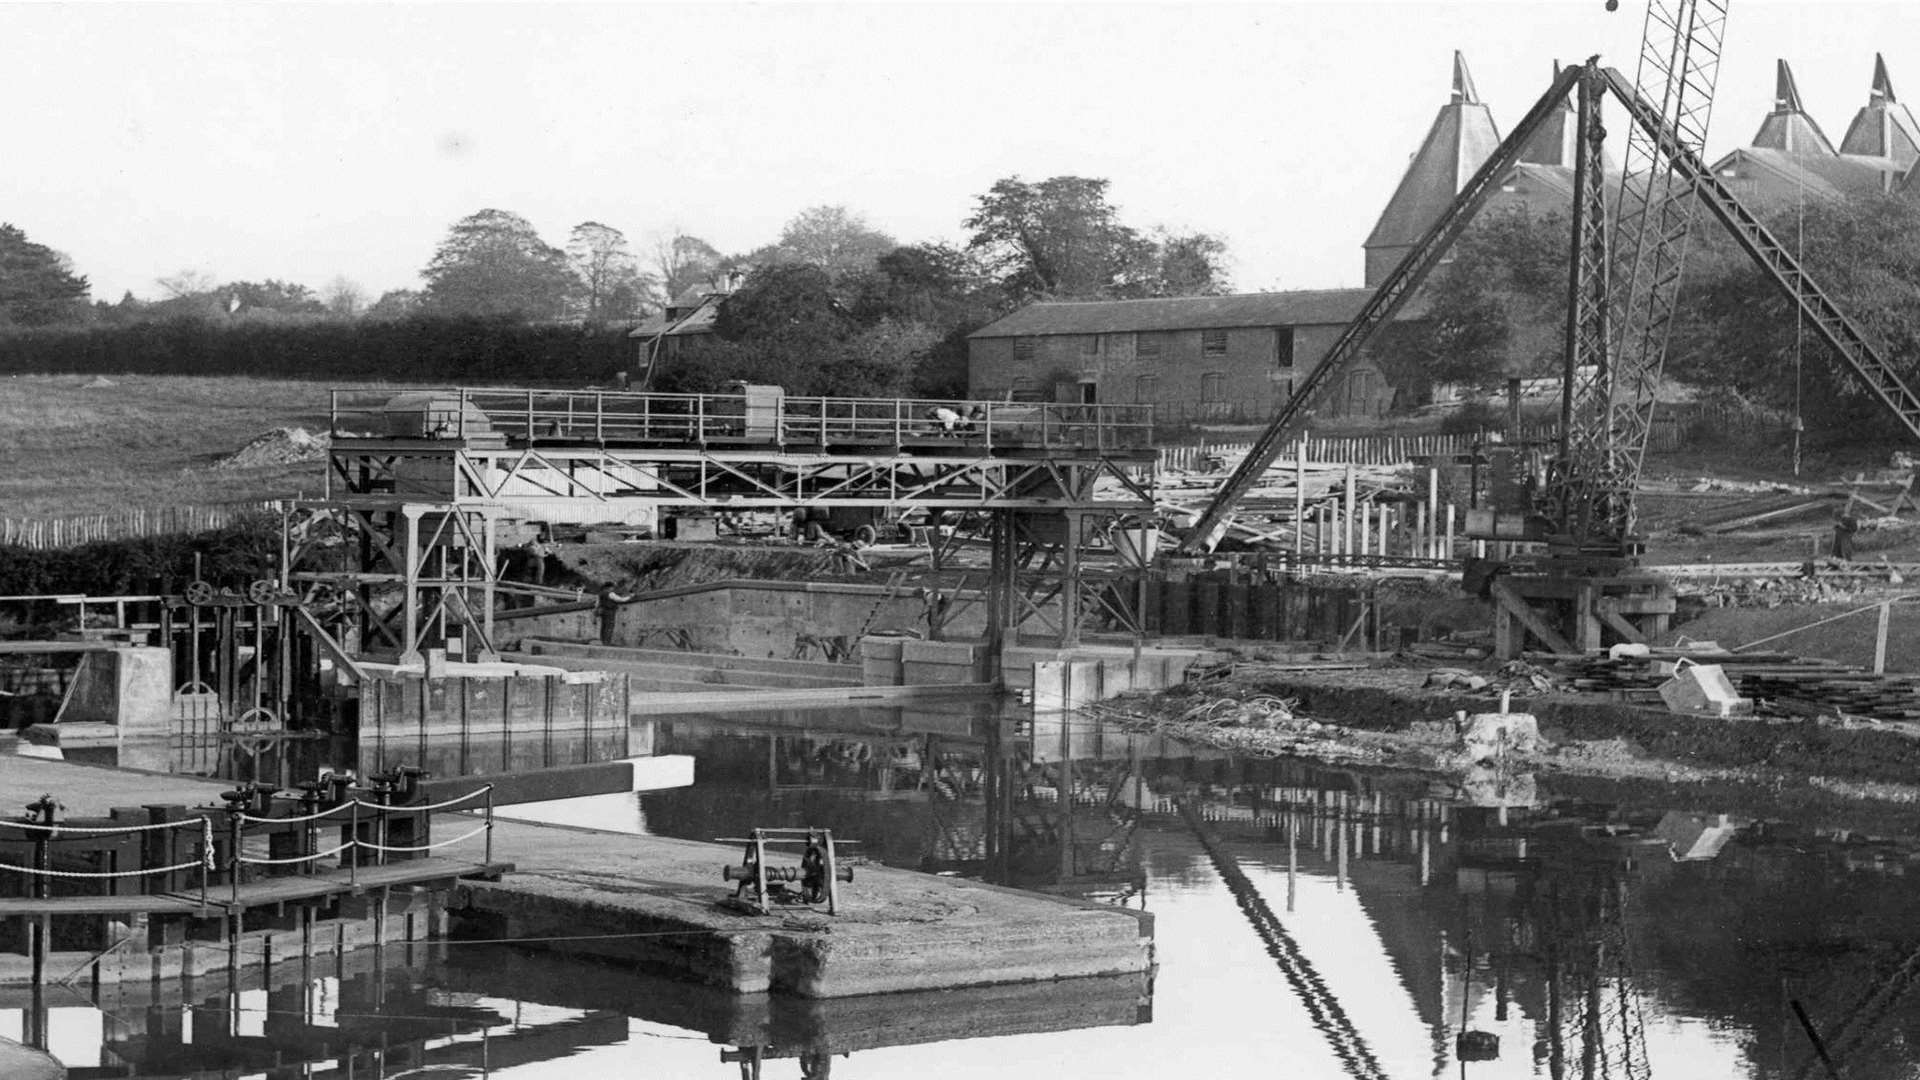 East Farleigh locks were rebuilt in 1938. file pic from 'Images of Maidstone' book page 174